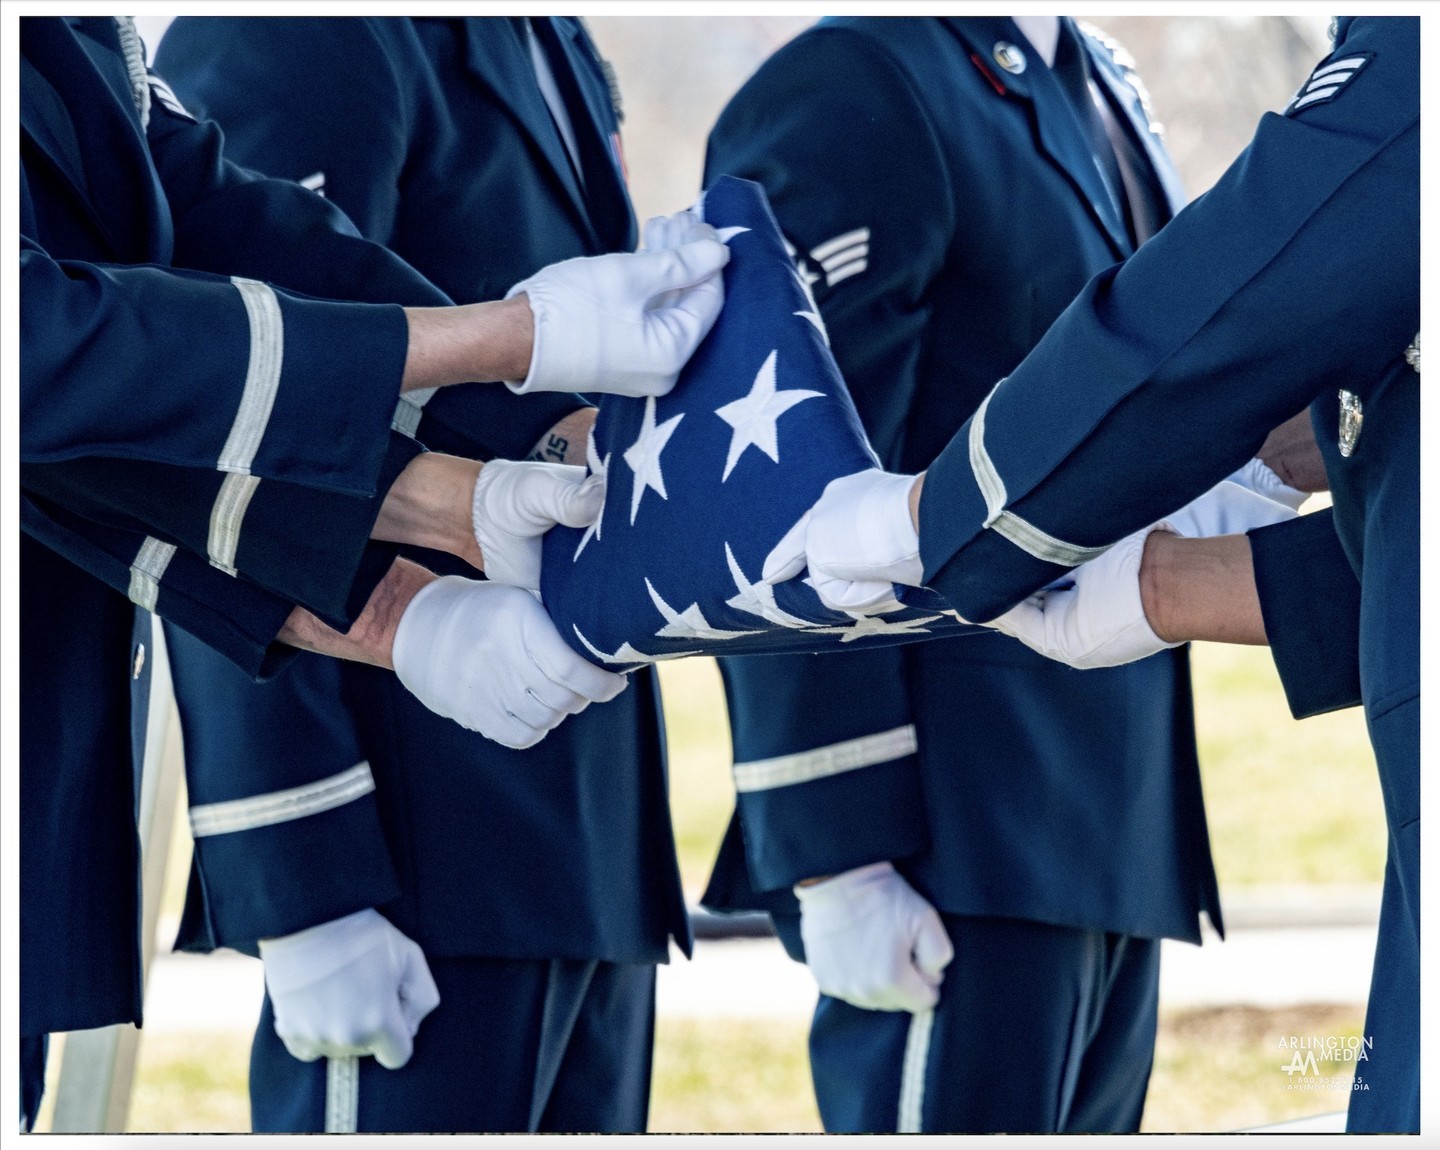 Airmen fold a flag in honor of a US Air Force veteran during a service in Arlington.  The flag is folded with precision, passed along the line of airmen, and presented with honors to the primary descendent.